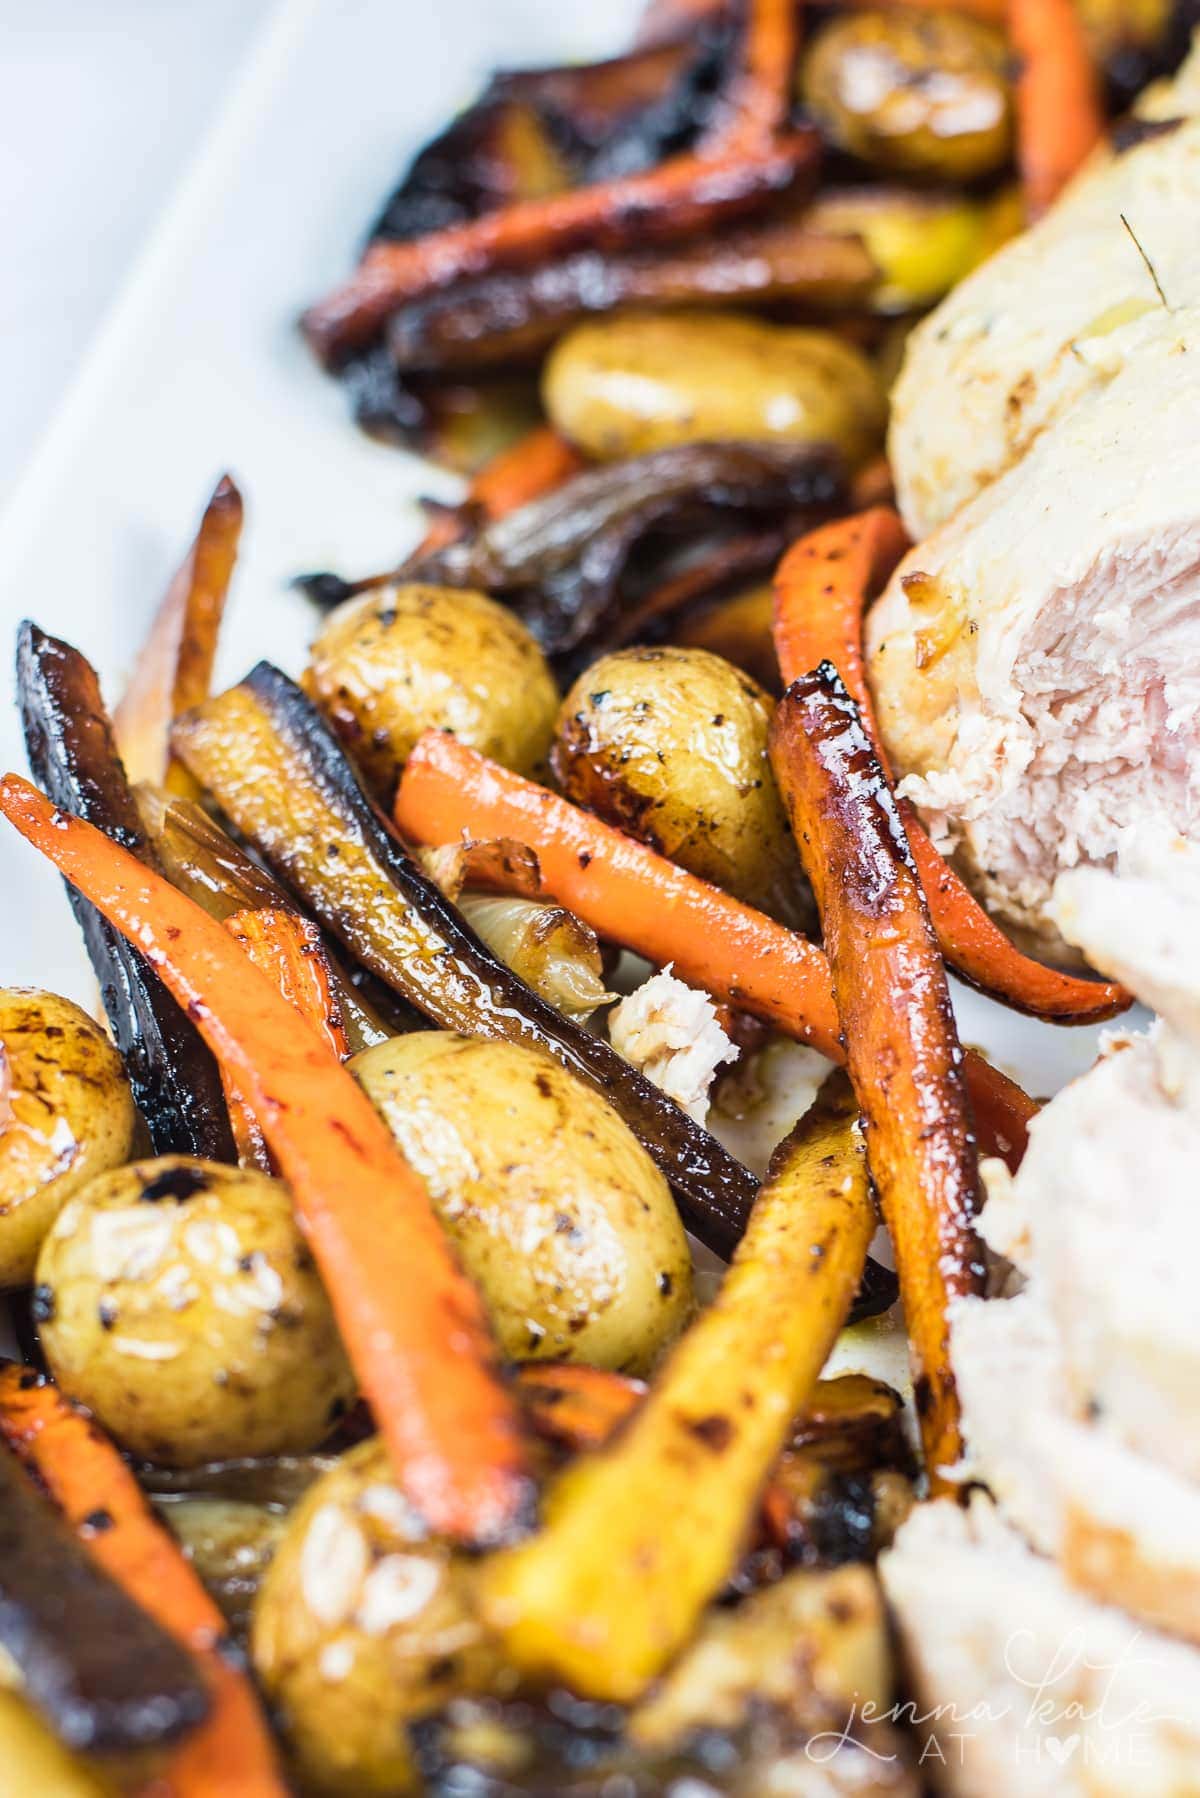 These roasted root vegetables are the perfect side to serve along a roasted turkey breast